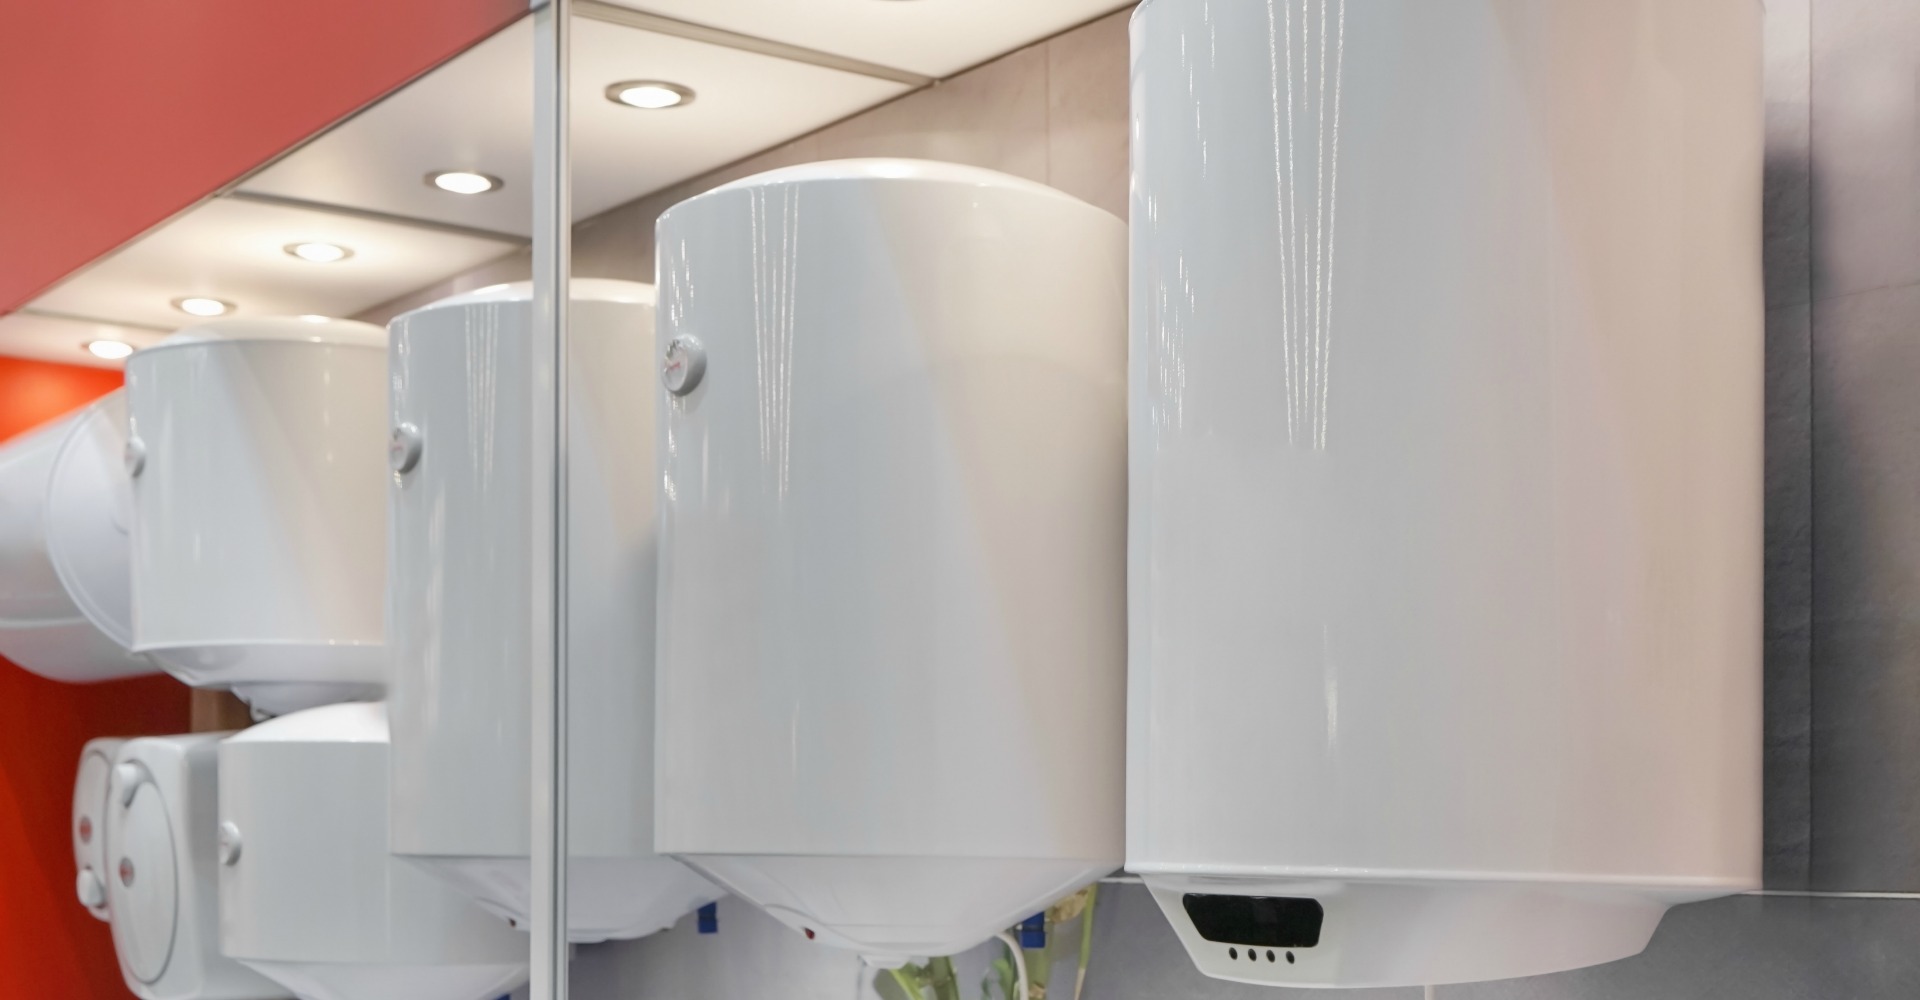 water-heaters Water Heaters- Which Type Is the Right One for Your Home?